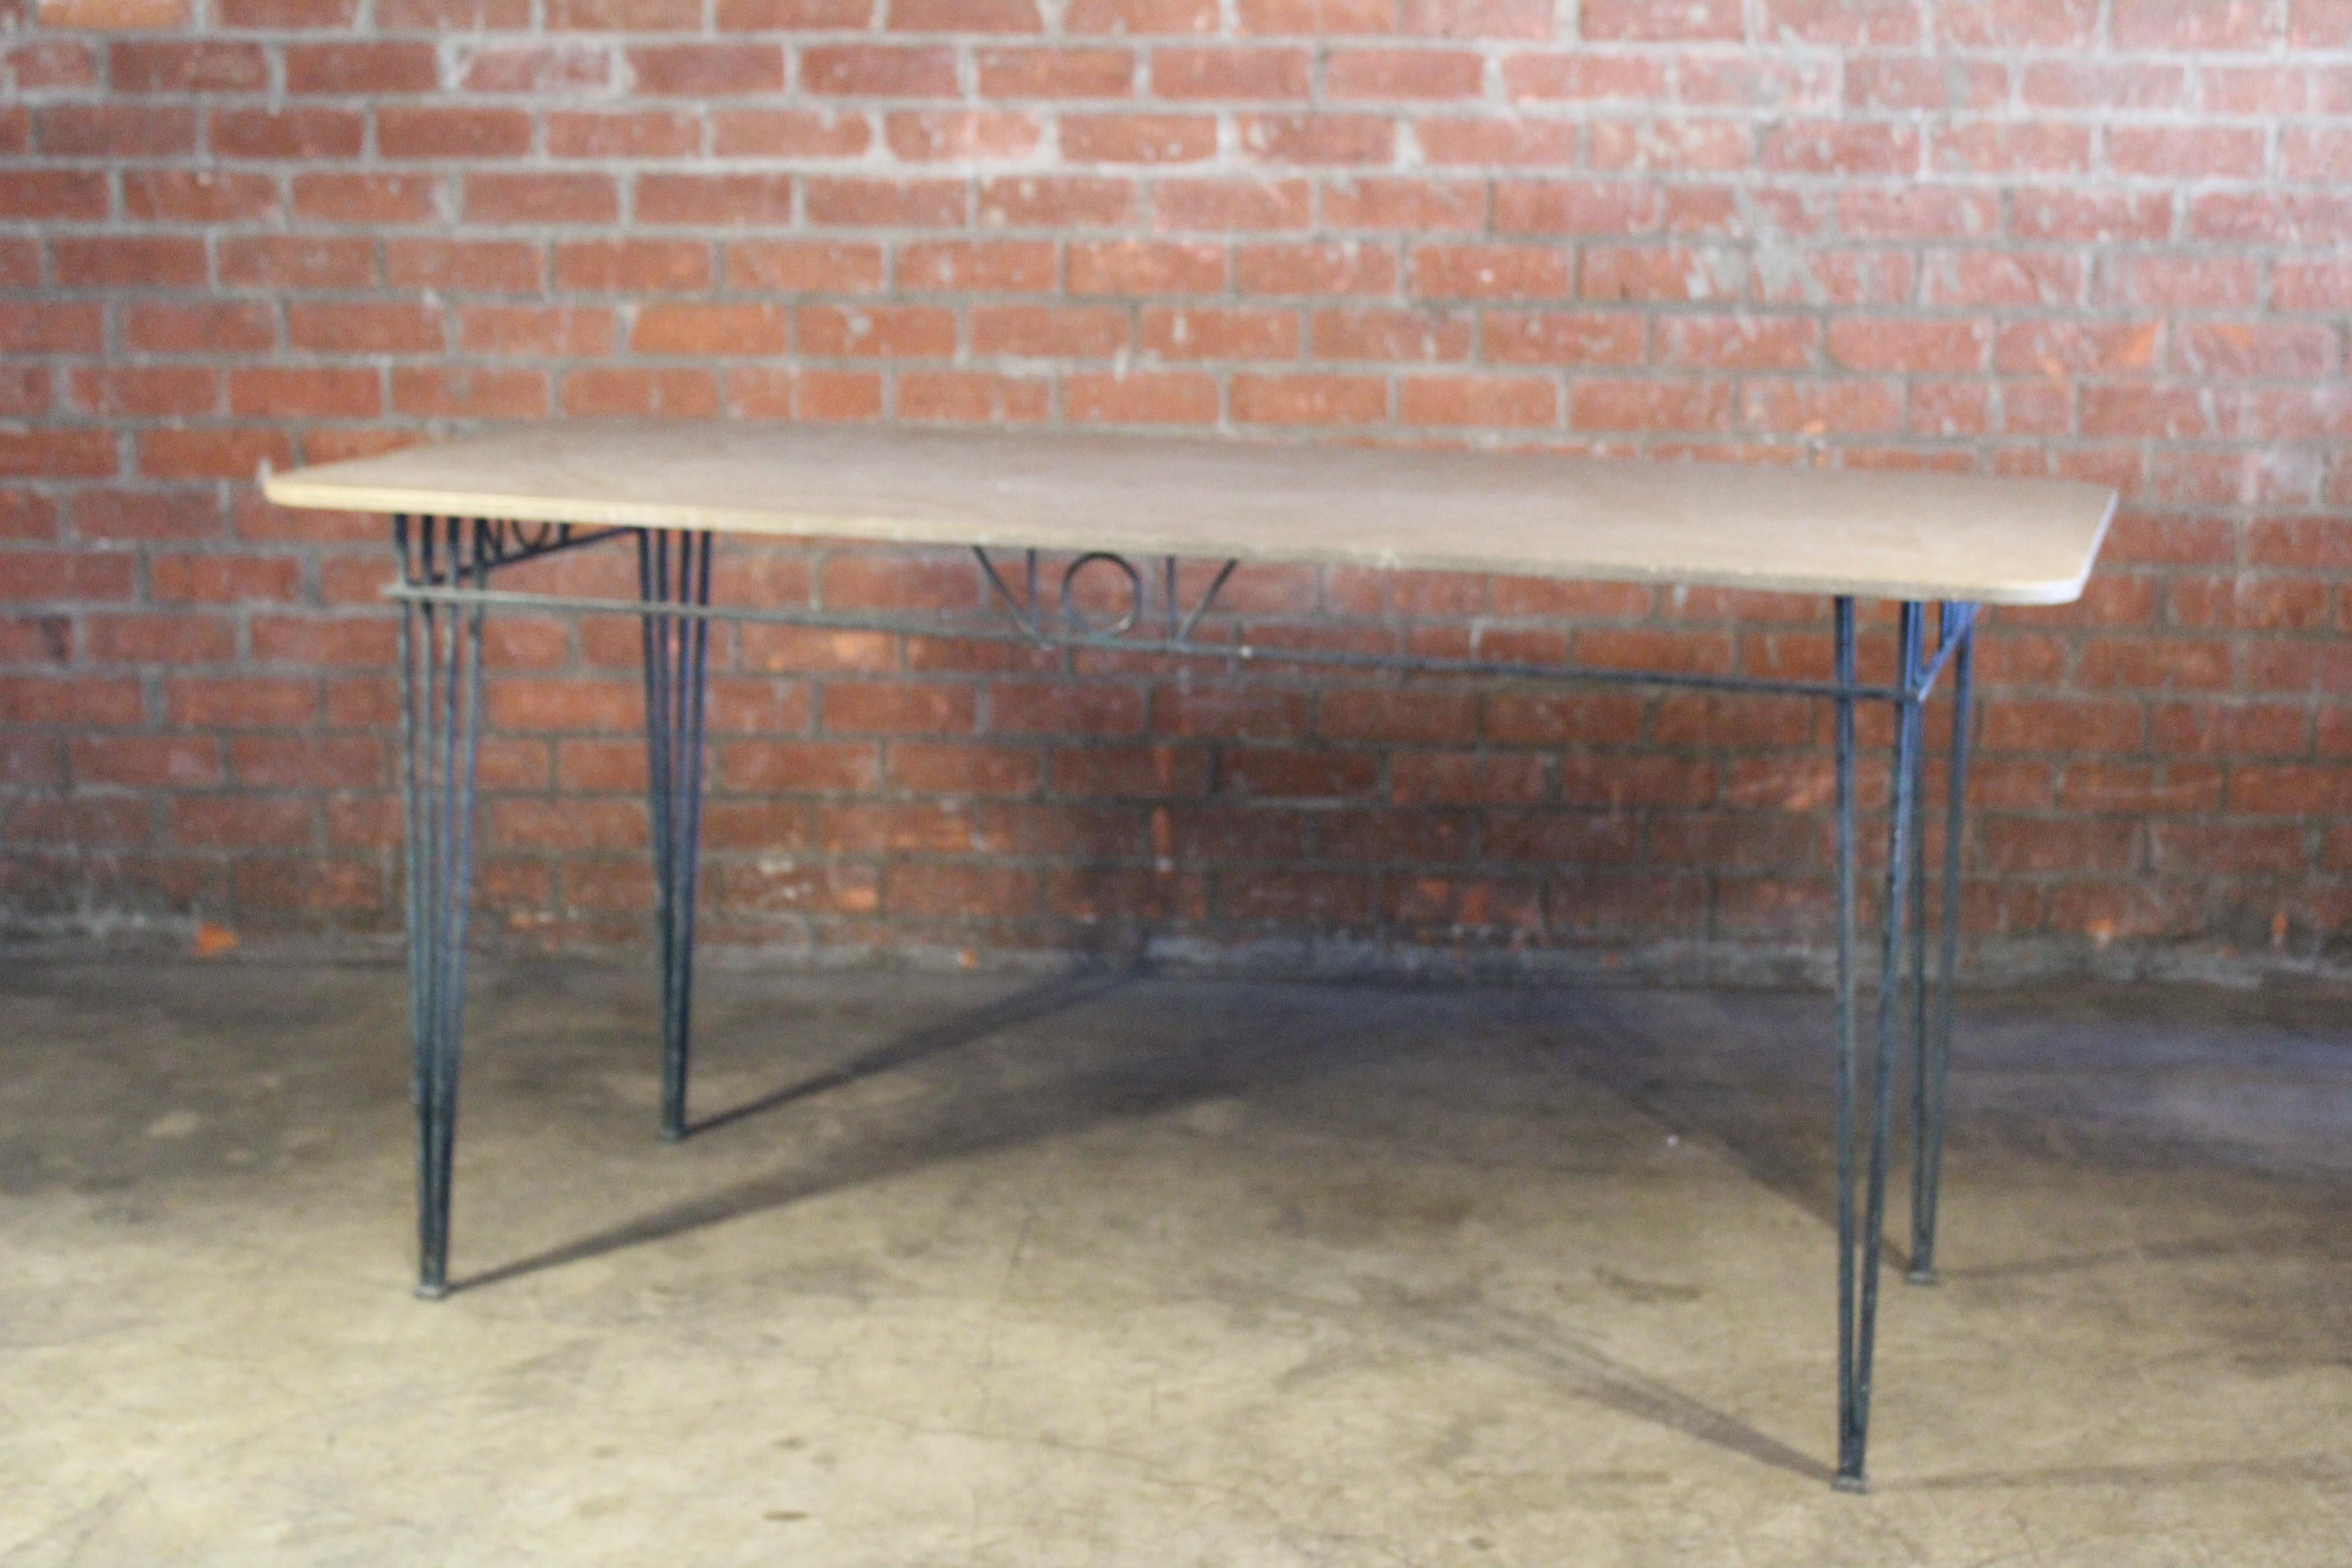 A vintage bar-height console or dining table from France, 1950s. Stone top. in good condition with patina to the iron base.